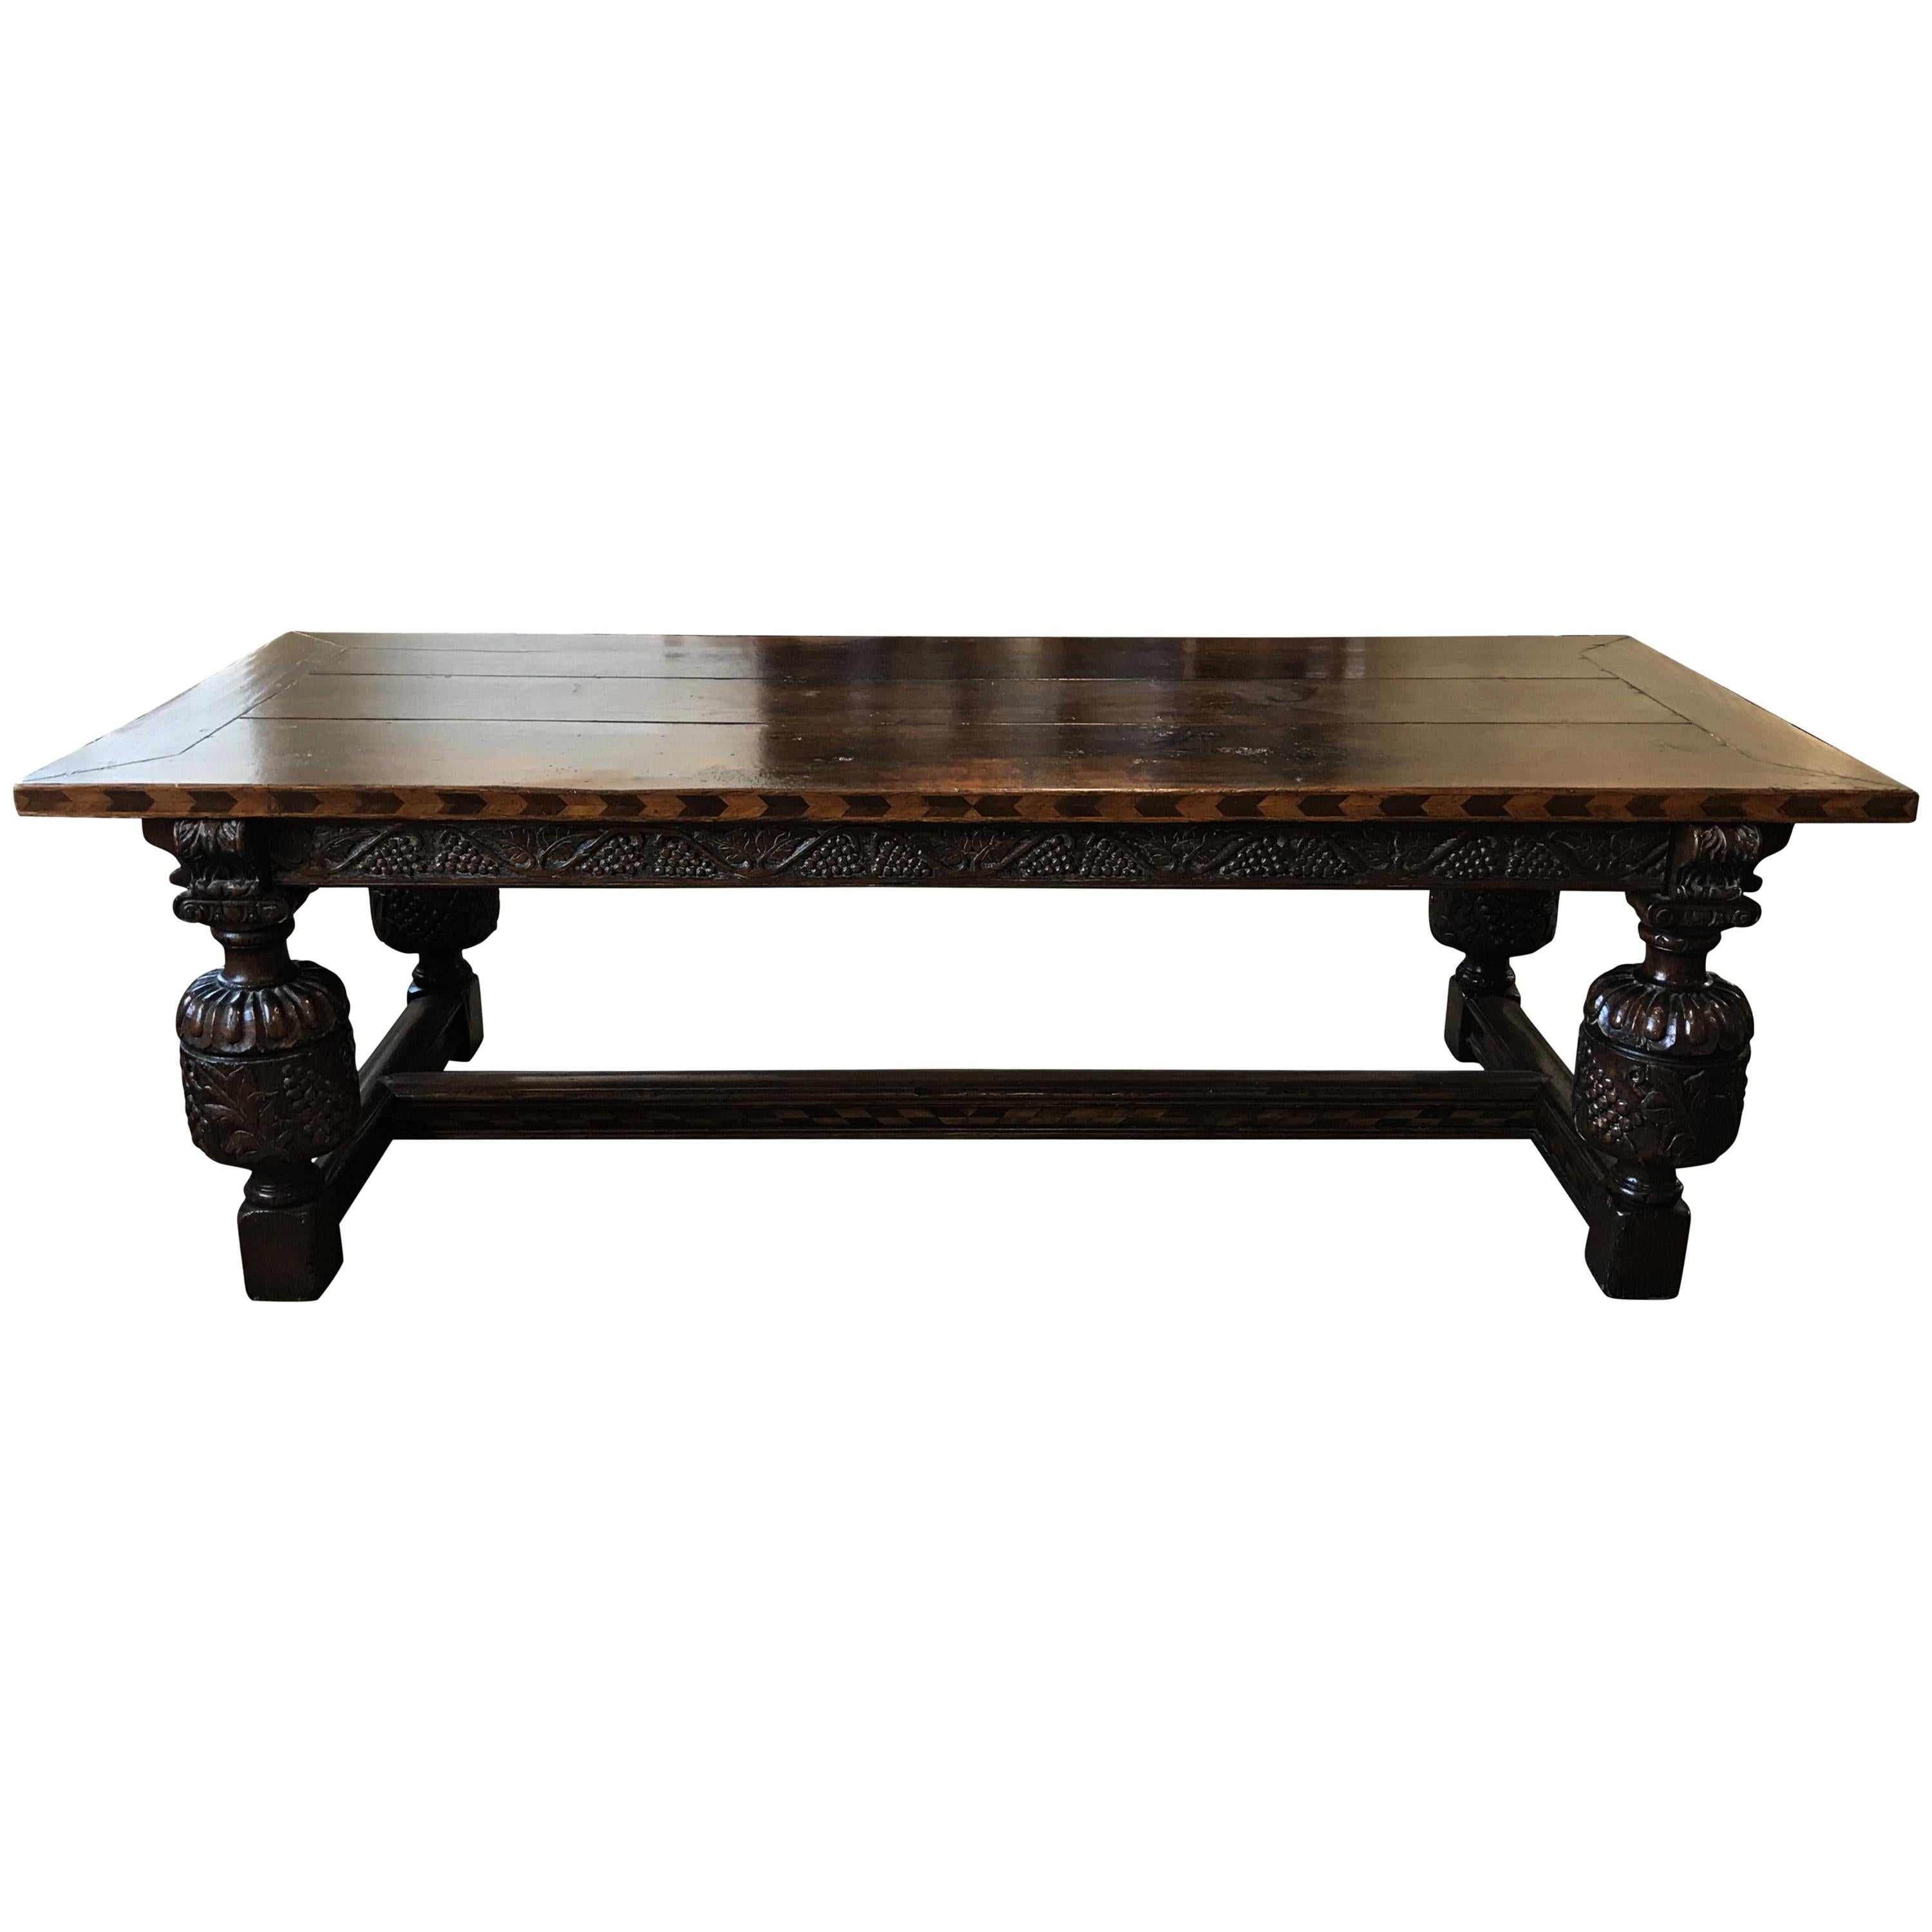 Henry VIII Refectory Table